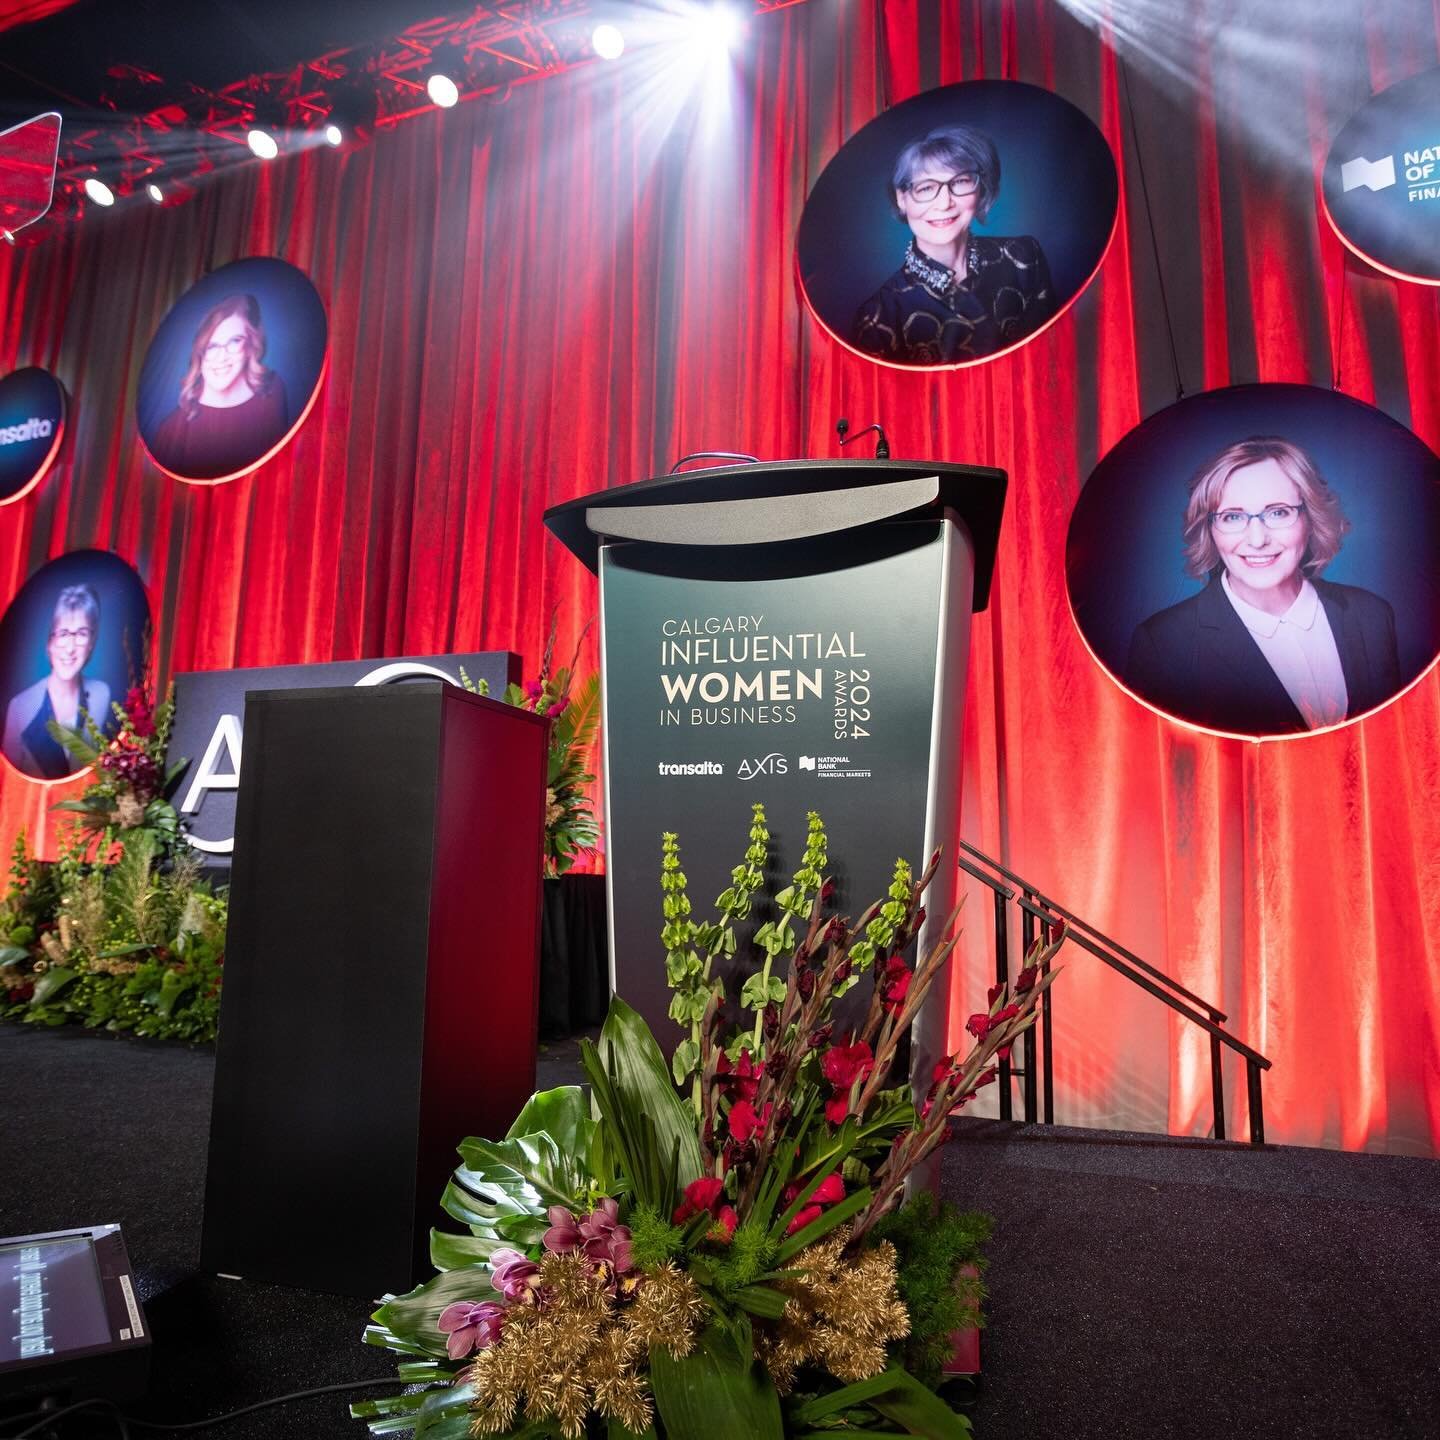 This was our 4th (!) year producing the Calgary Influential Women in Business Awards for Axis Connects and it just keeps getting bigger and better.⁠
⁠
We were once again inspired by Calgary&rsquo;s business community showing up and celebrating divers